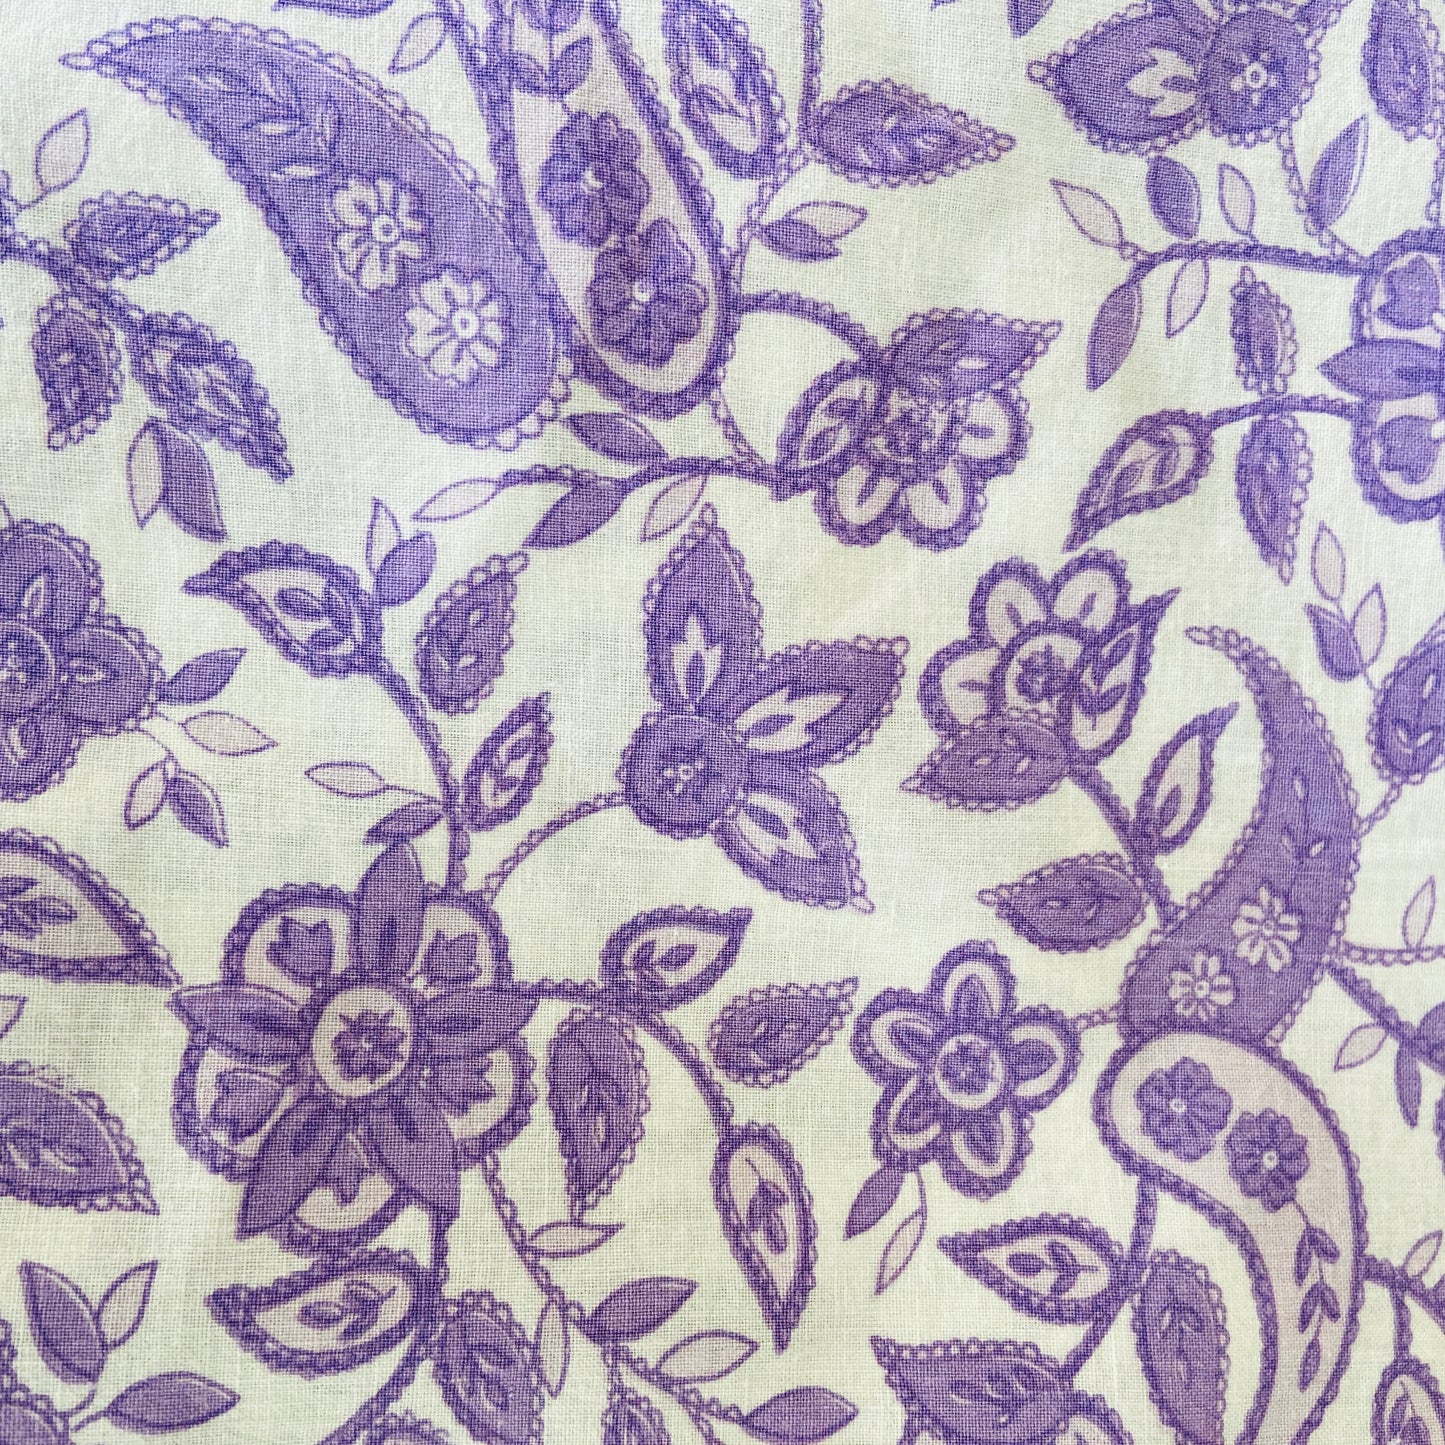 Vintage Sheet Fabric Paisley Bright Good Condition Sewing Craft